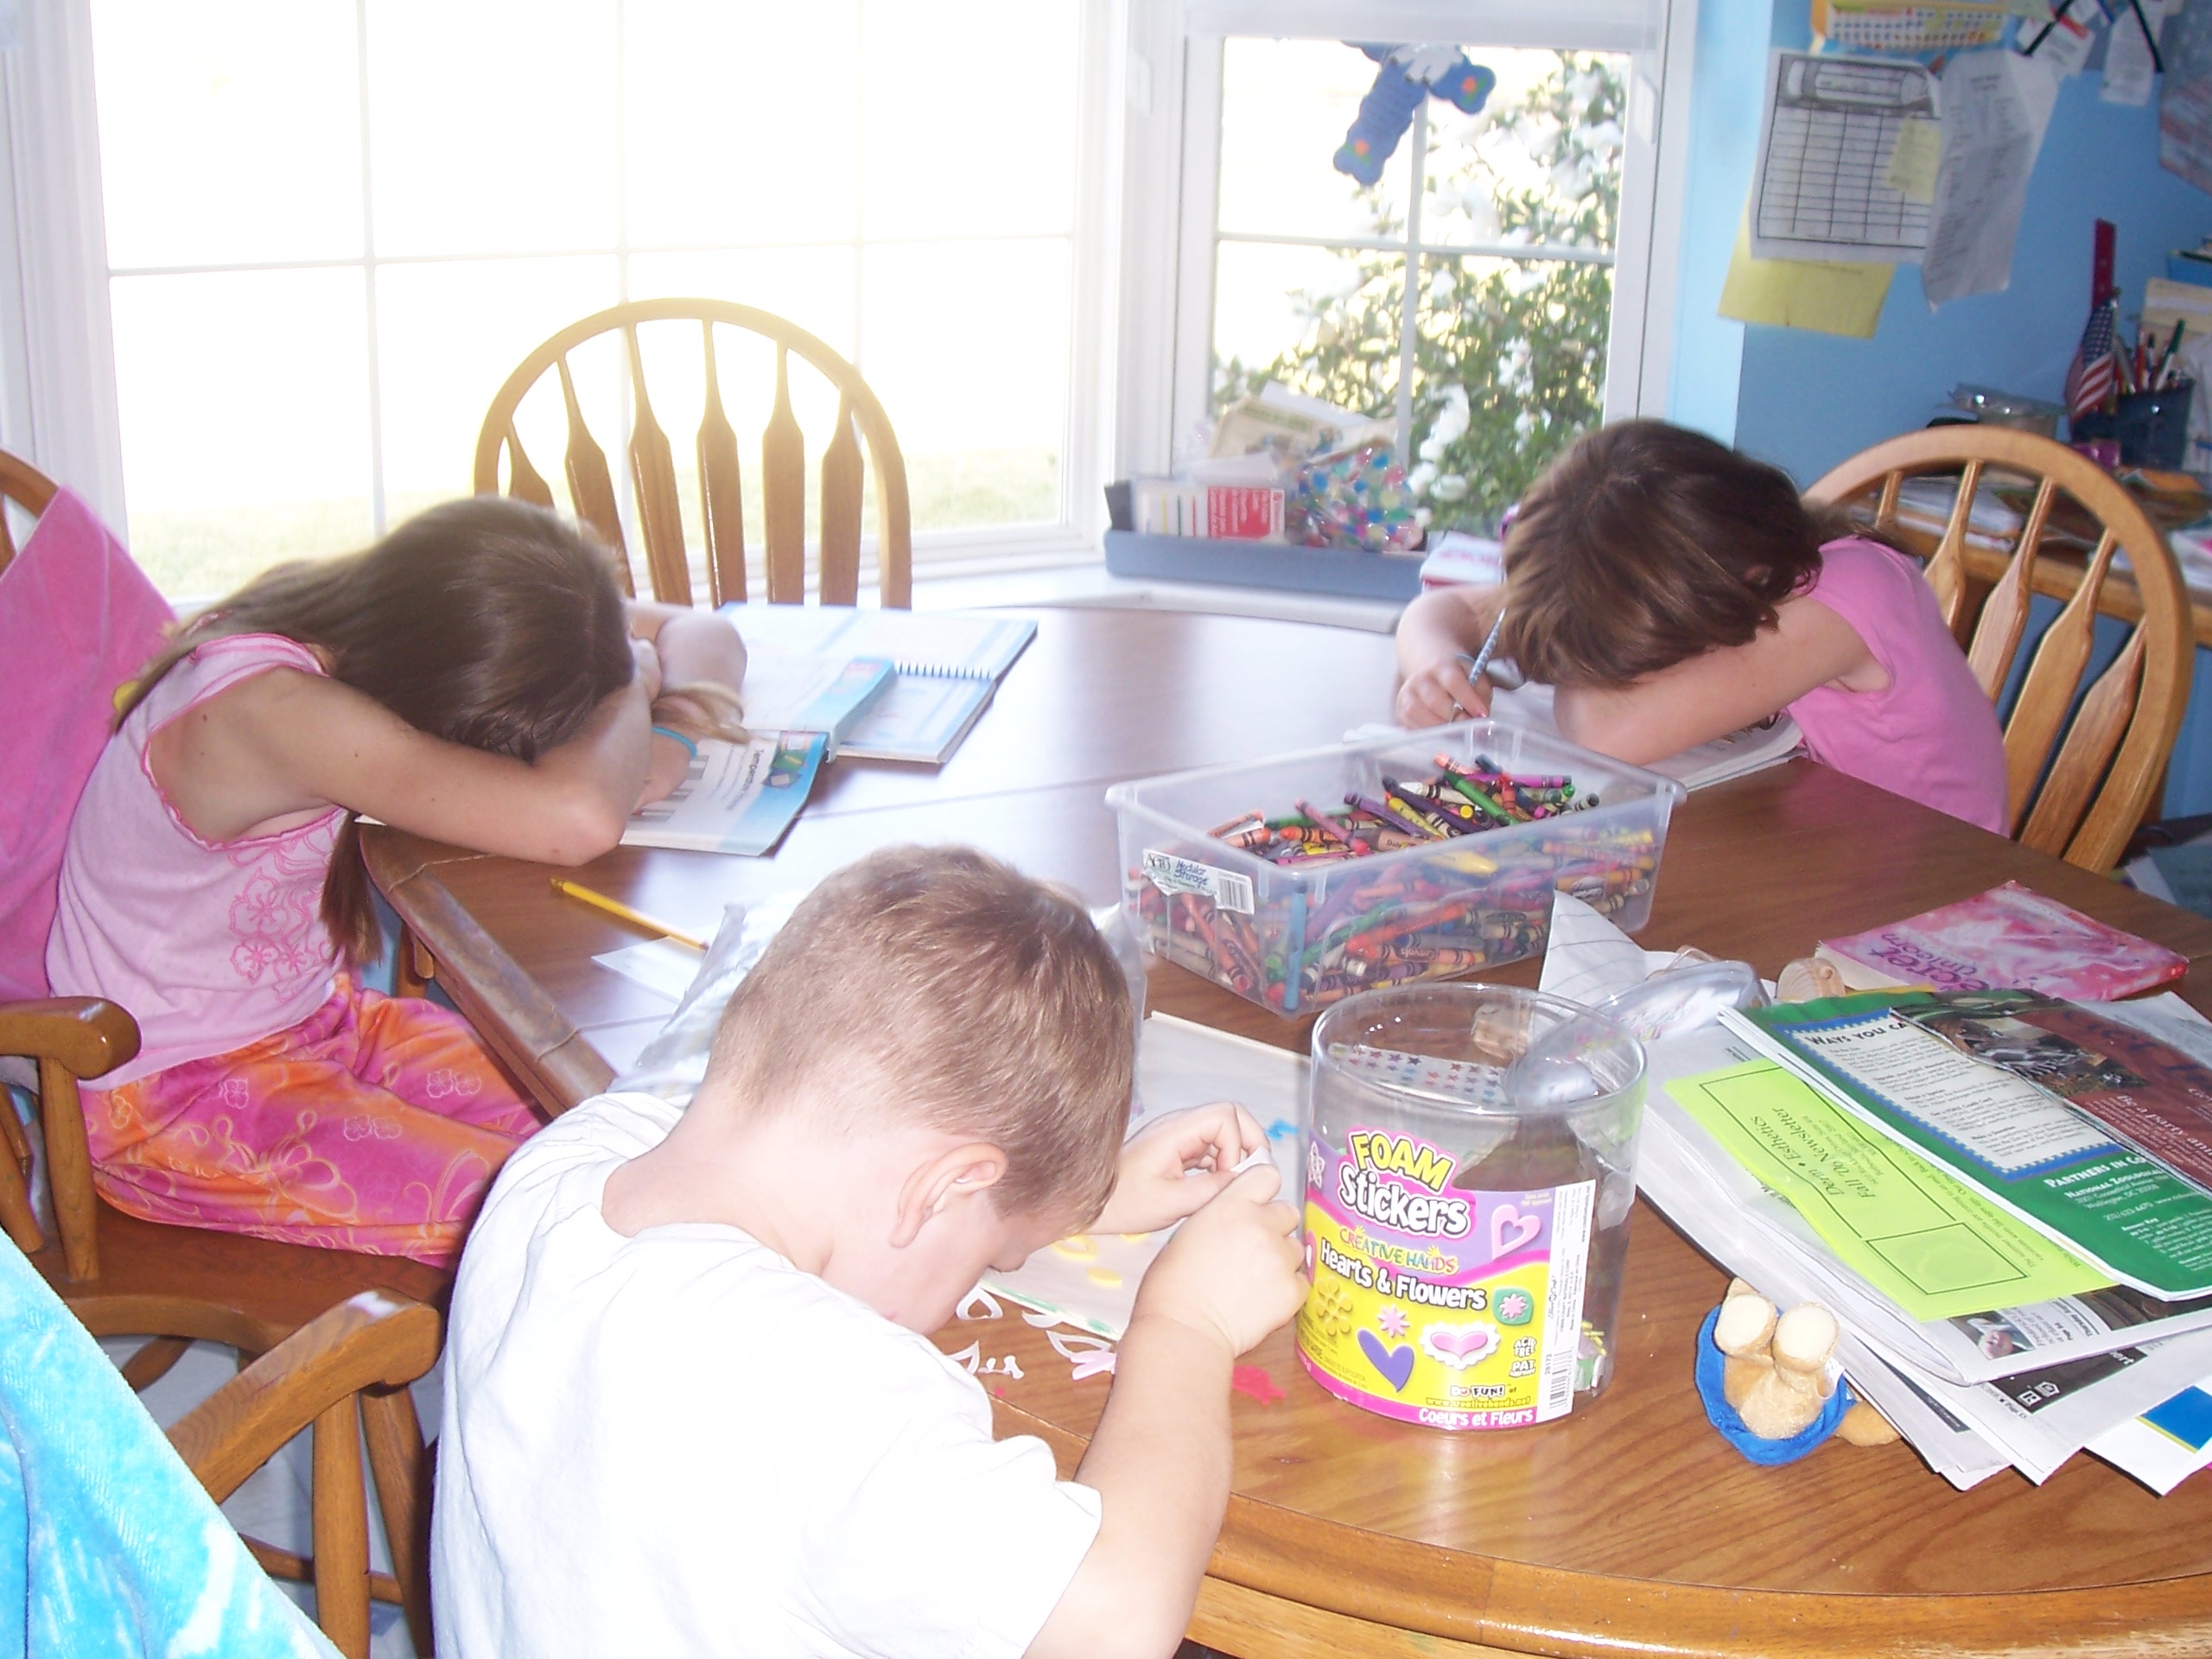 Kids Work on Summer Workbooks at the Kitchen Table. All three are resting their heads on their hands. Their hands are on top of their workbooks.